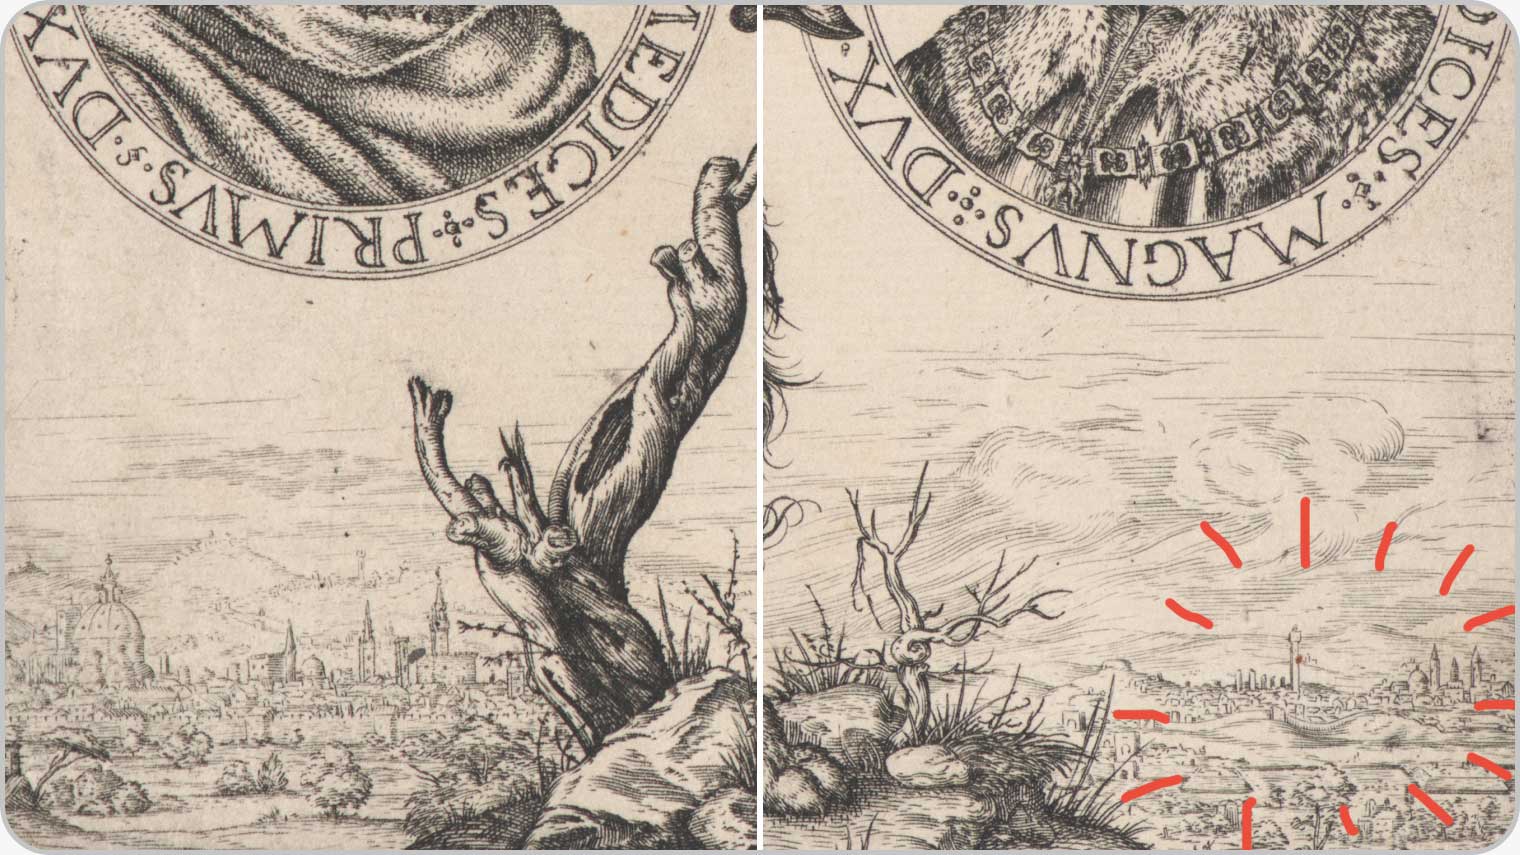 Detail of an engraving; red mark-ups that are not original to the artwork have been added digitally to call out the city vista of Siena depicted on the right, compared with the city vista of Florence on the left